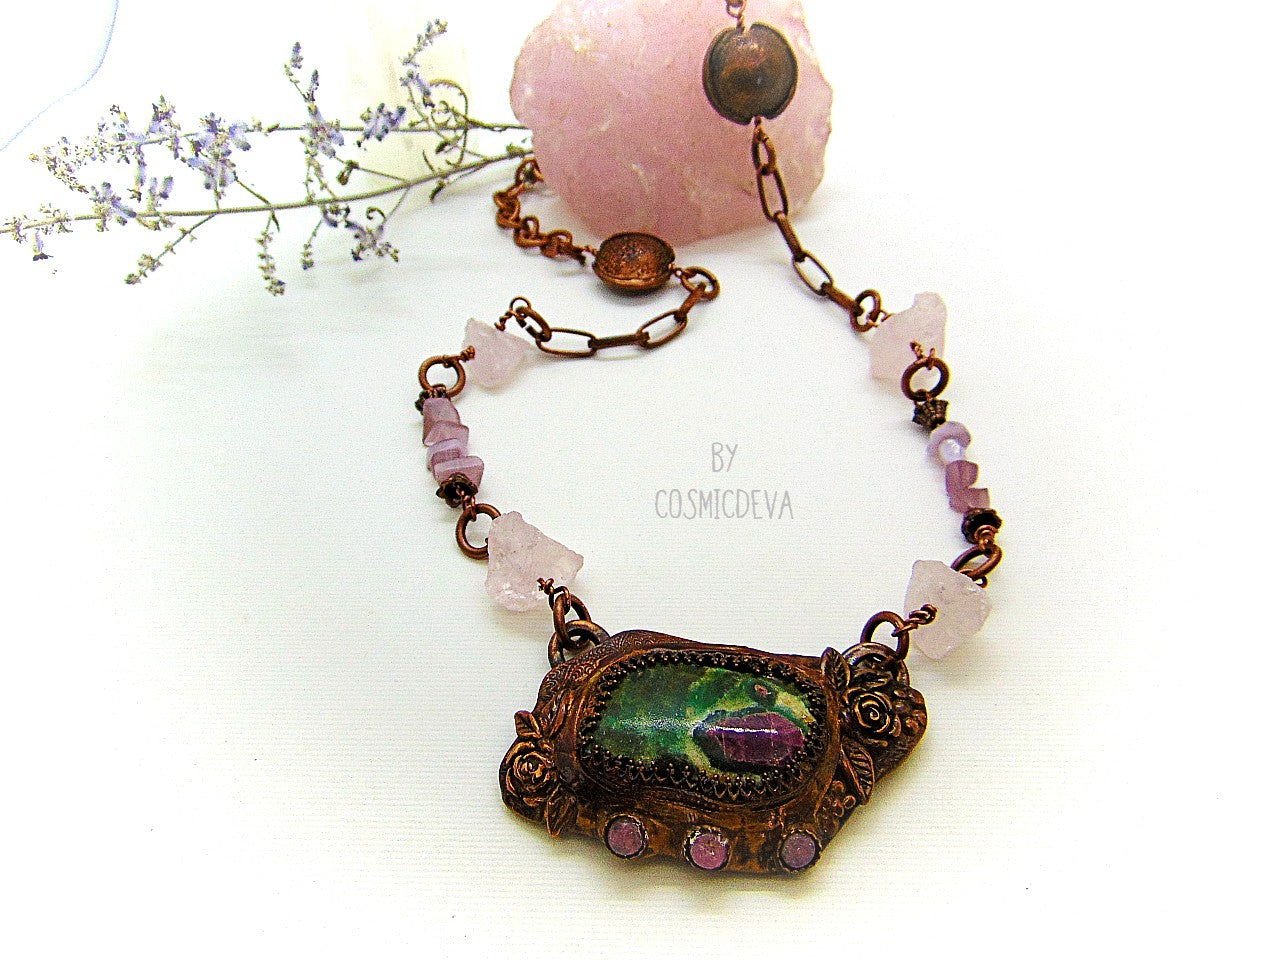 One of a kind handmade necklace with a hand sculptured solid copper pendant featuring a beautiful ruby in fuchsite gemstone cabochon in a bezel setting, surrounded with roses and natural raw pink tourmaline gemstones. This ruby in fuchsite statement necklace pendant suspends from a copper chain with accentual raw rose quartz crystal gemstones and handcrafted copper lentil beads.